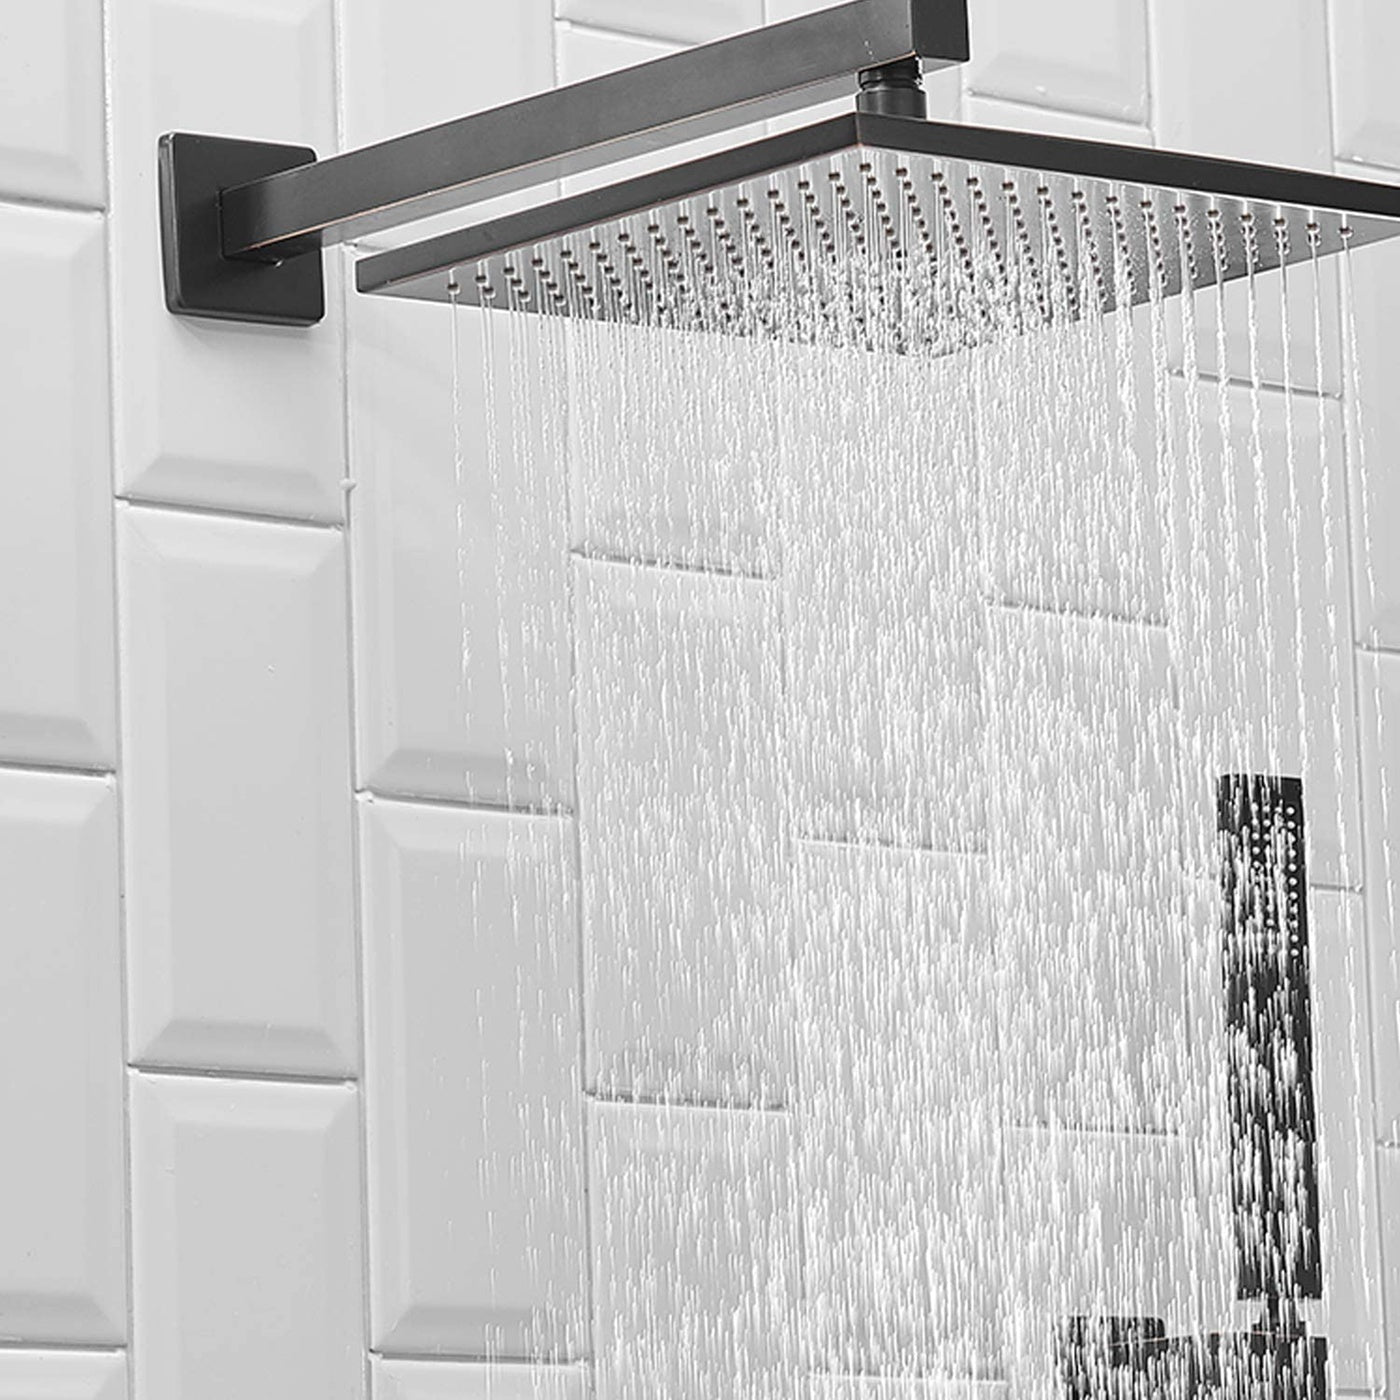 shower systems with rain shower and handheld